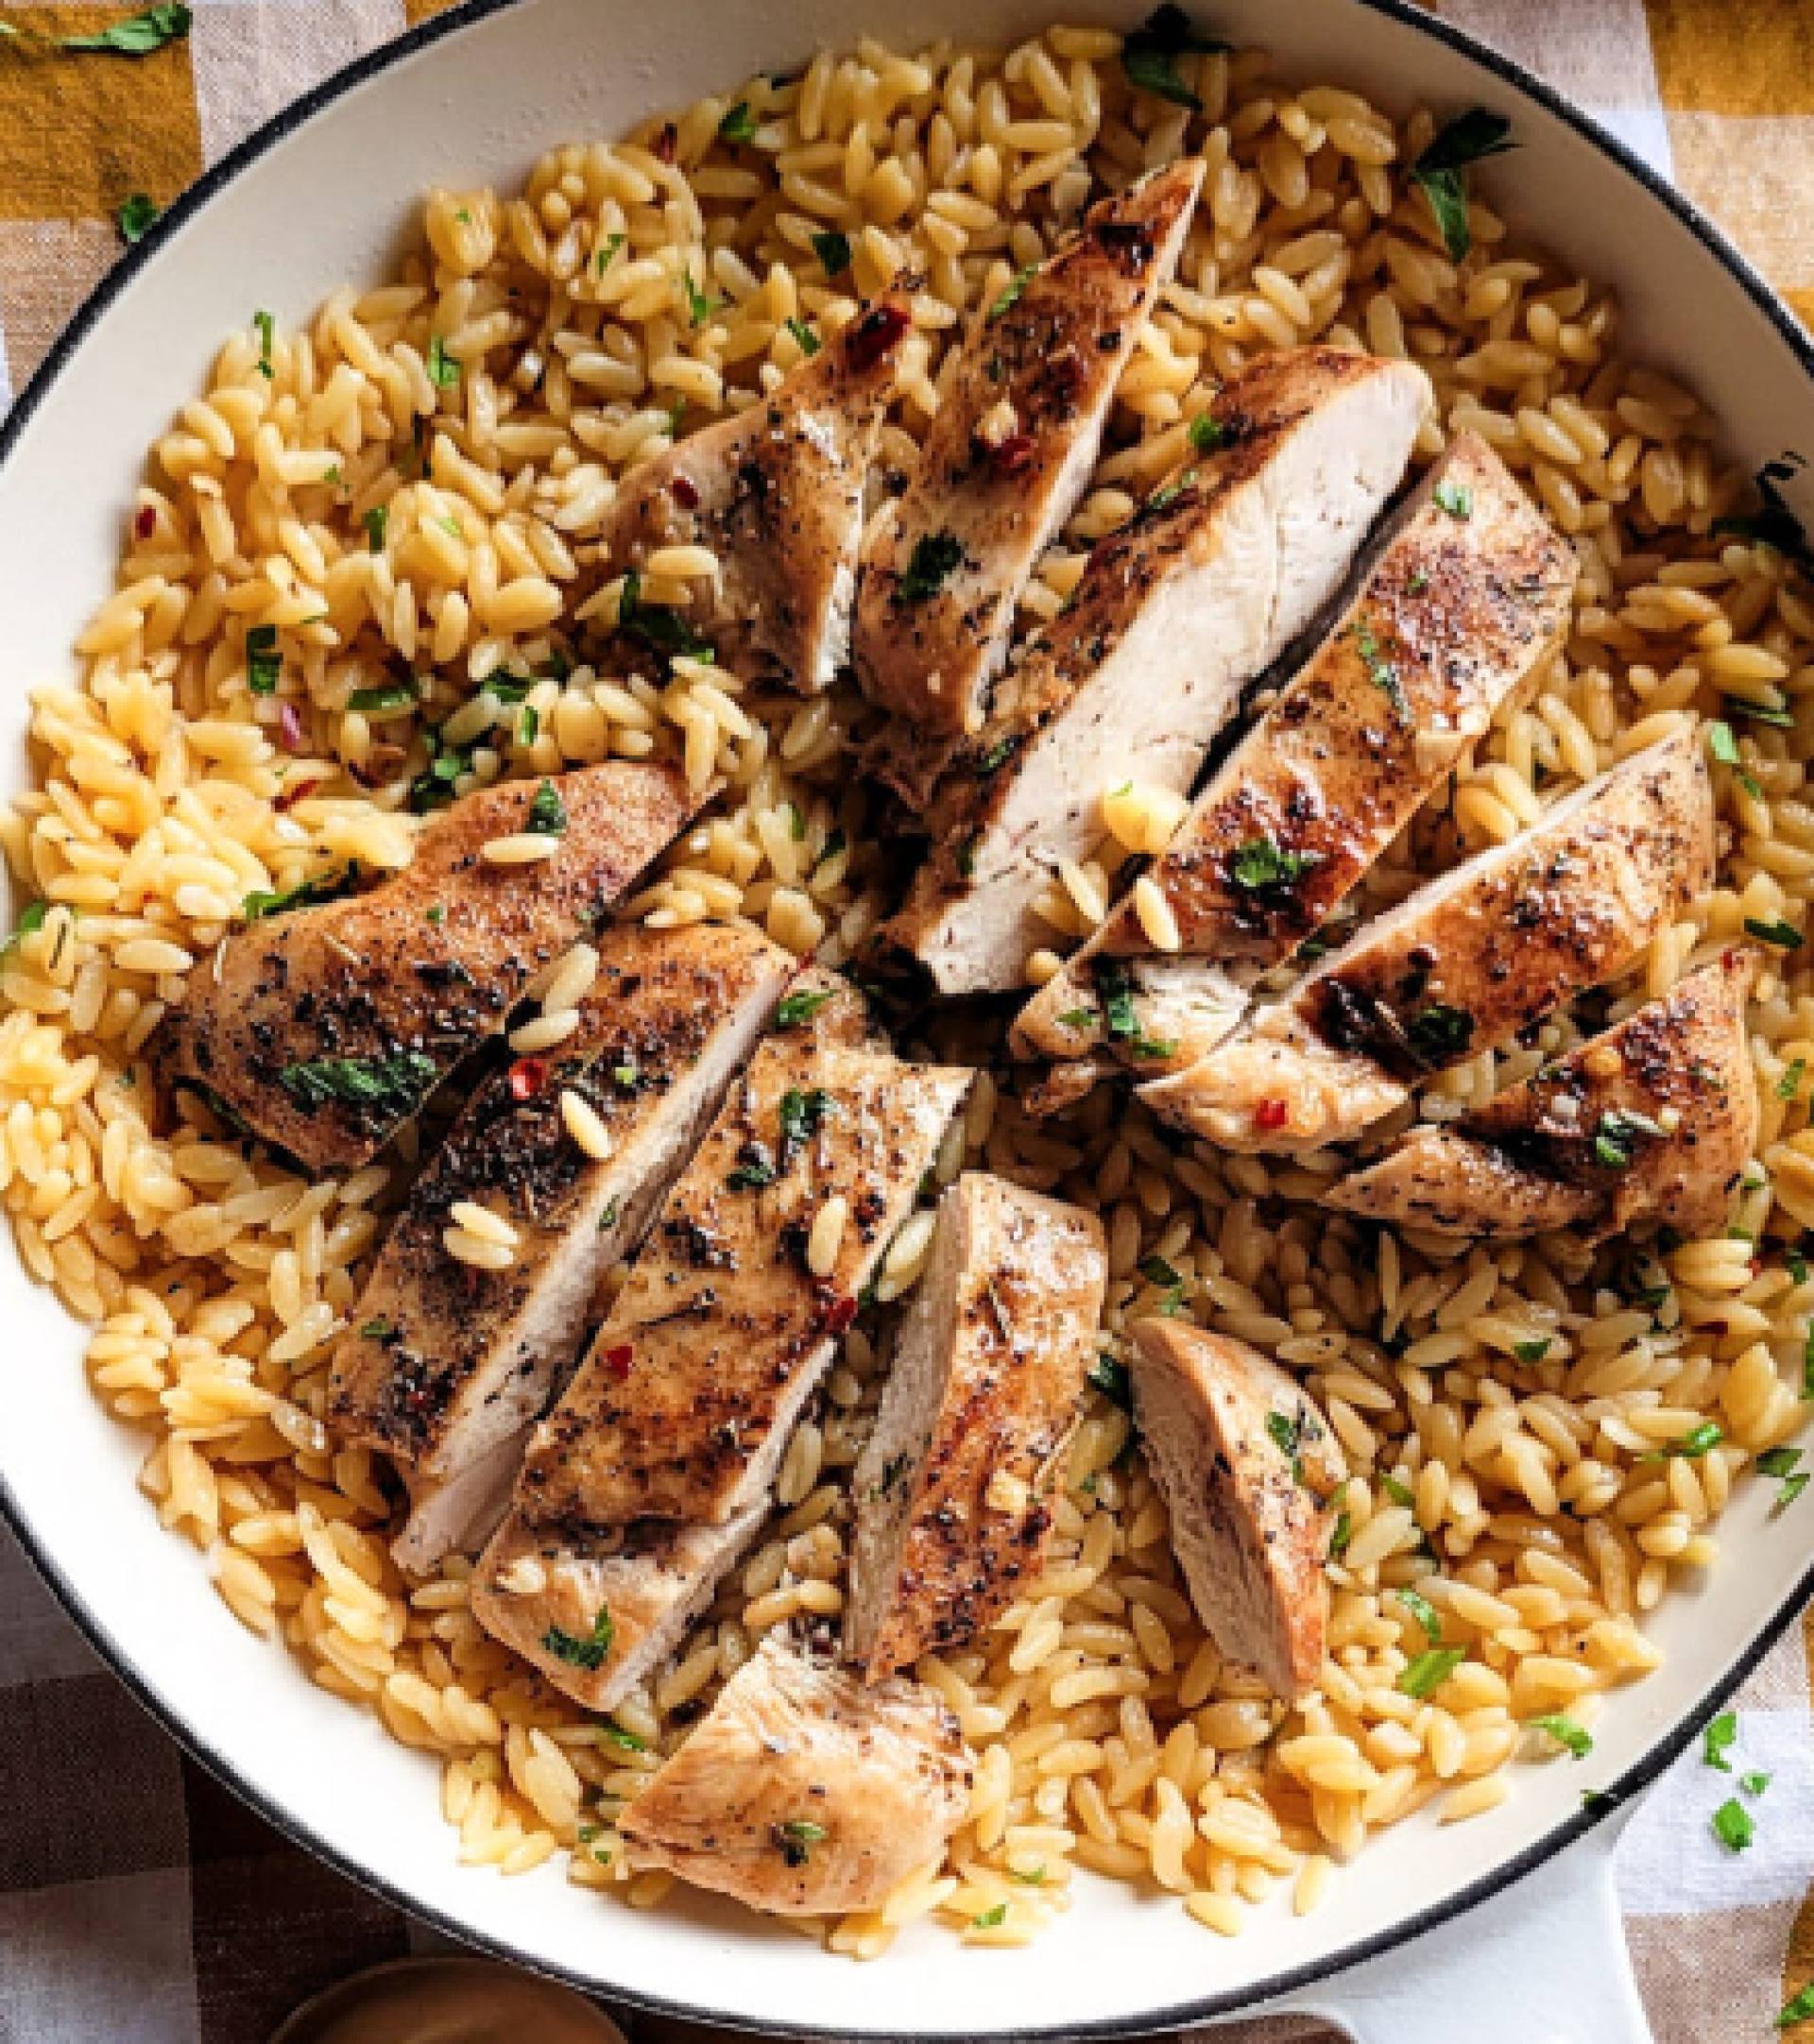 Garlic & Herb Chicken Breast with Tomato Orzo